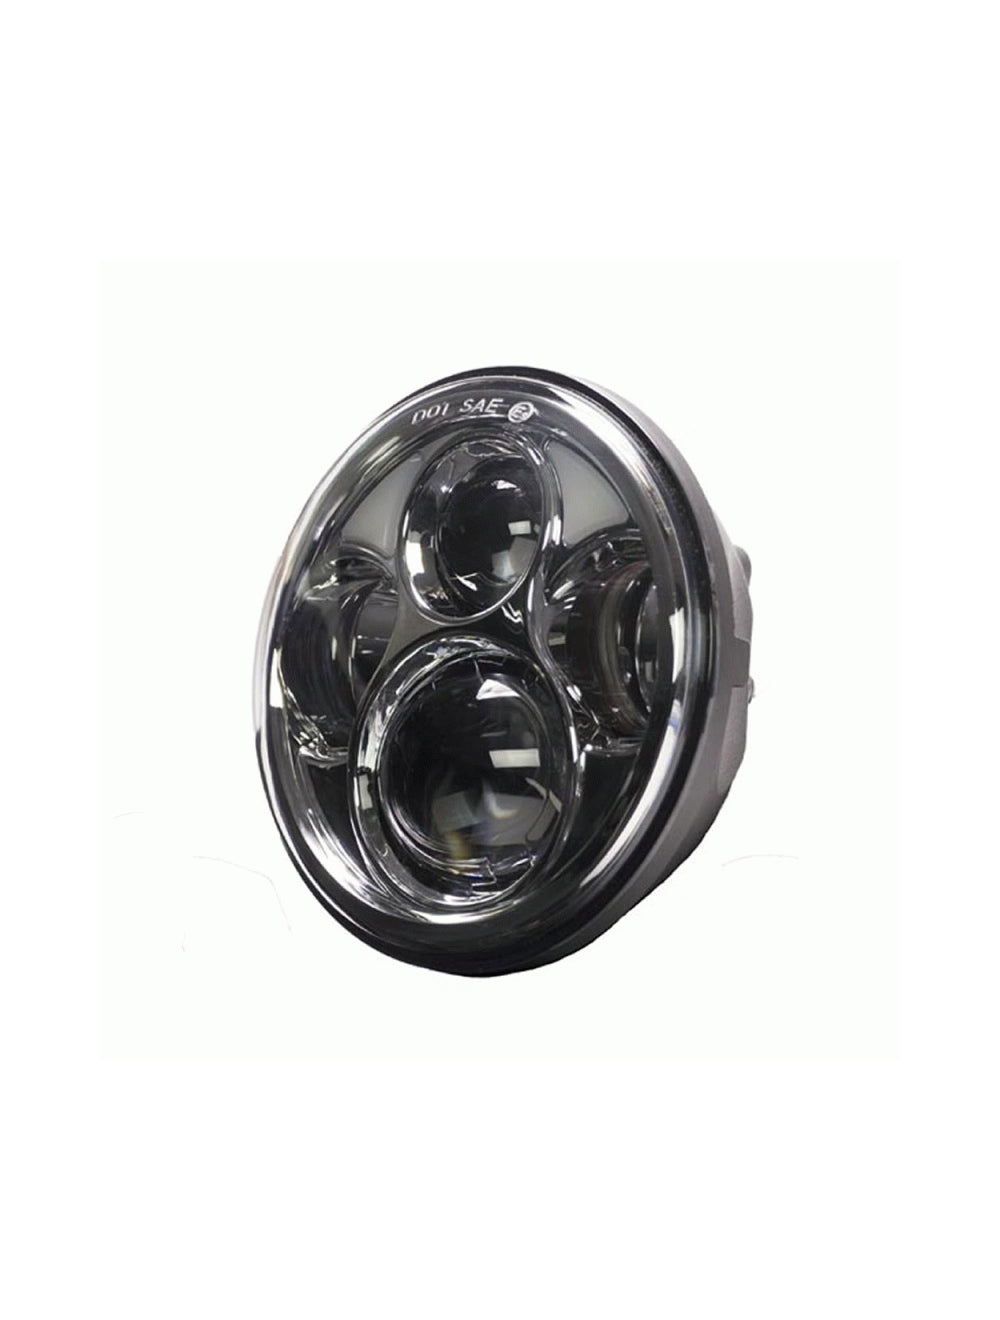 Heise HE-SHL562 Motorcycle 5.6 Inch Round Silver Front 8-Led Headlight